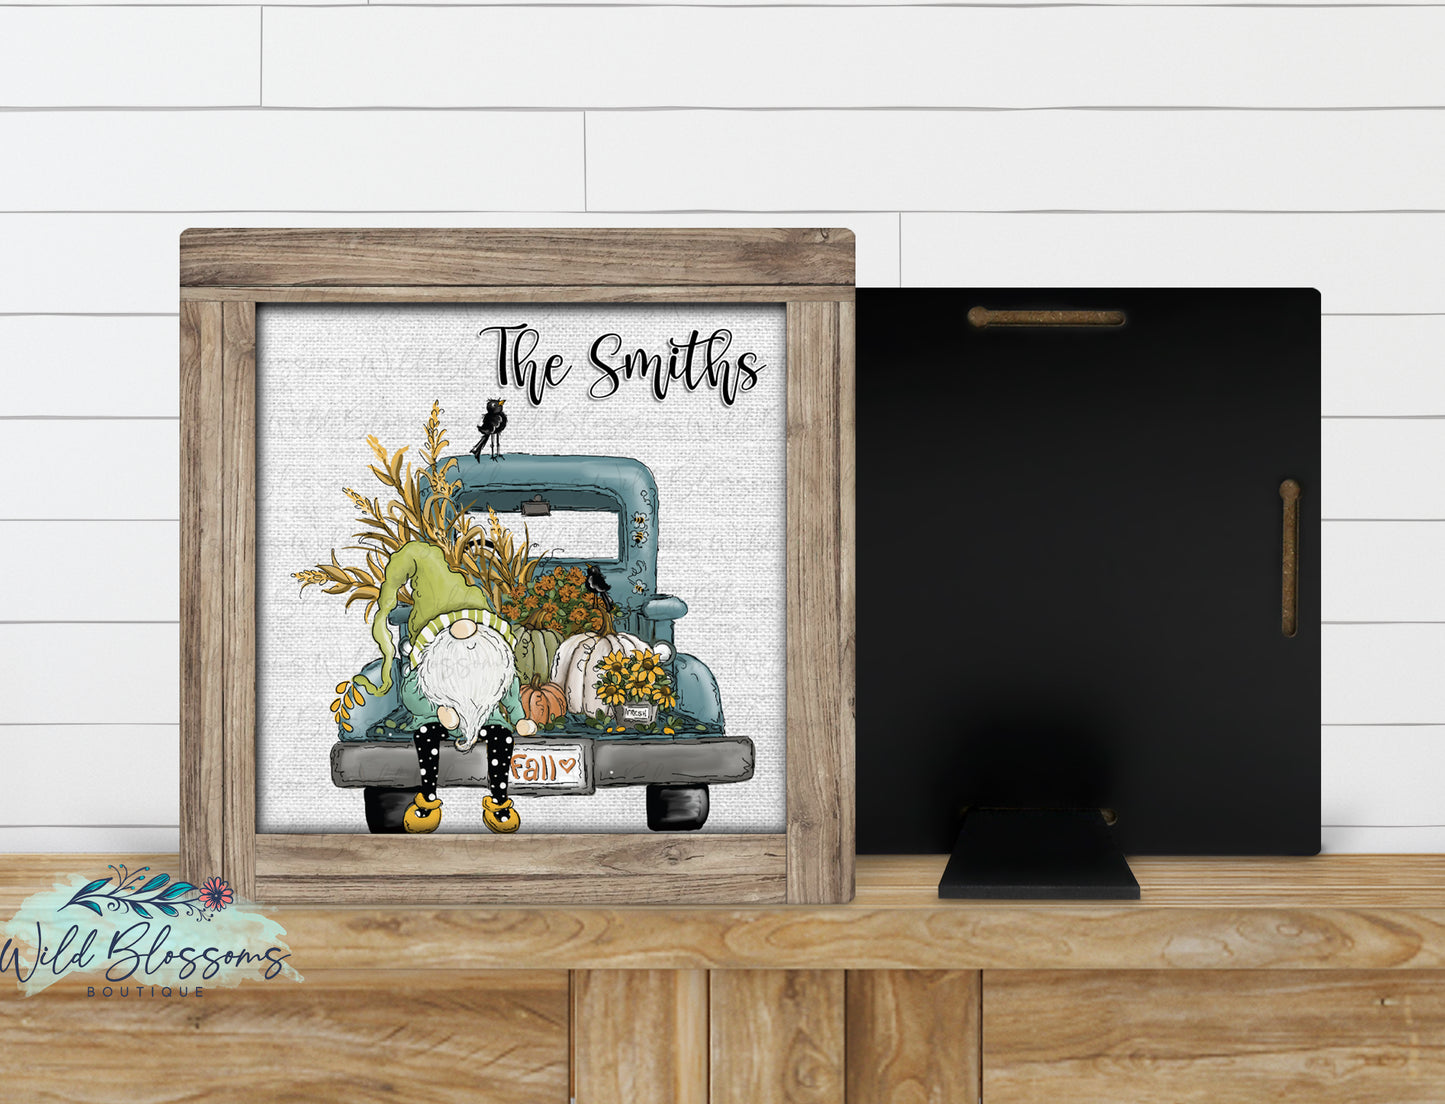 Hello Fall Gnome Vintage Truck Sign